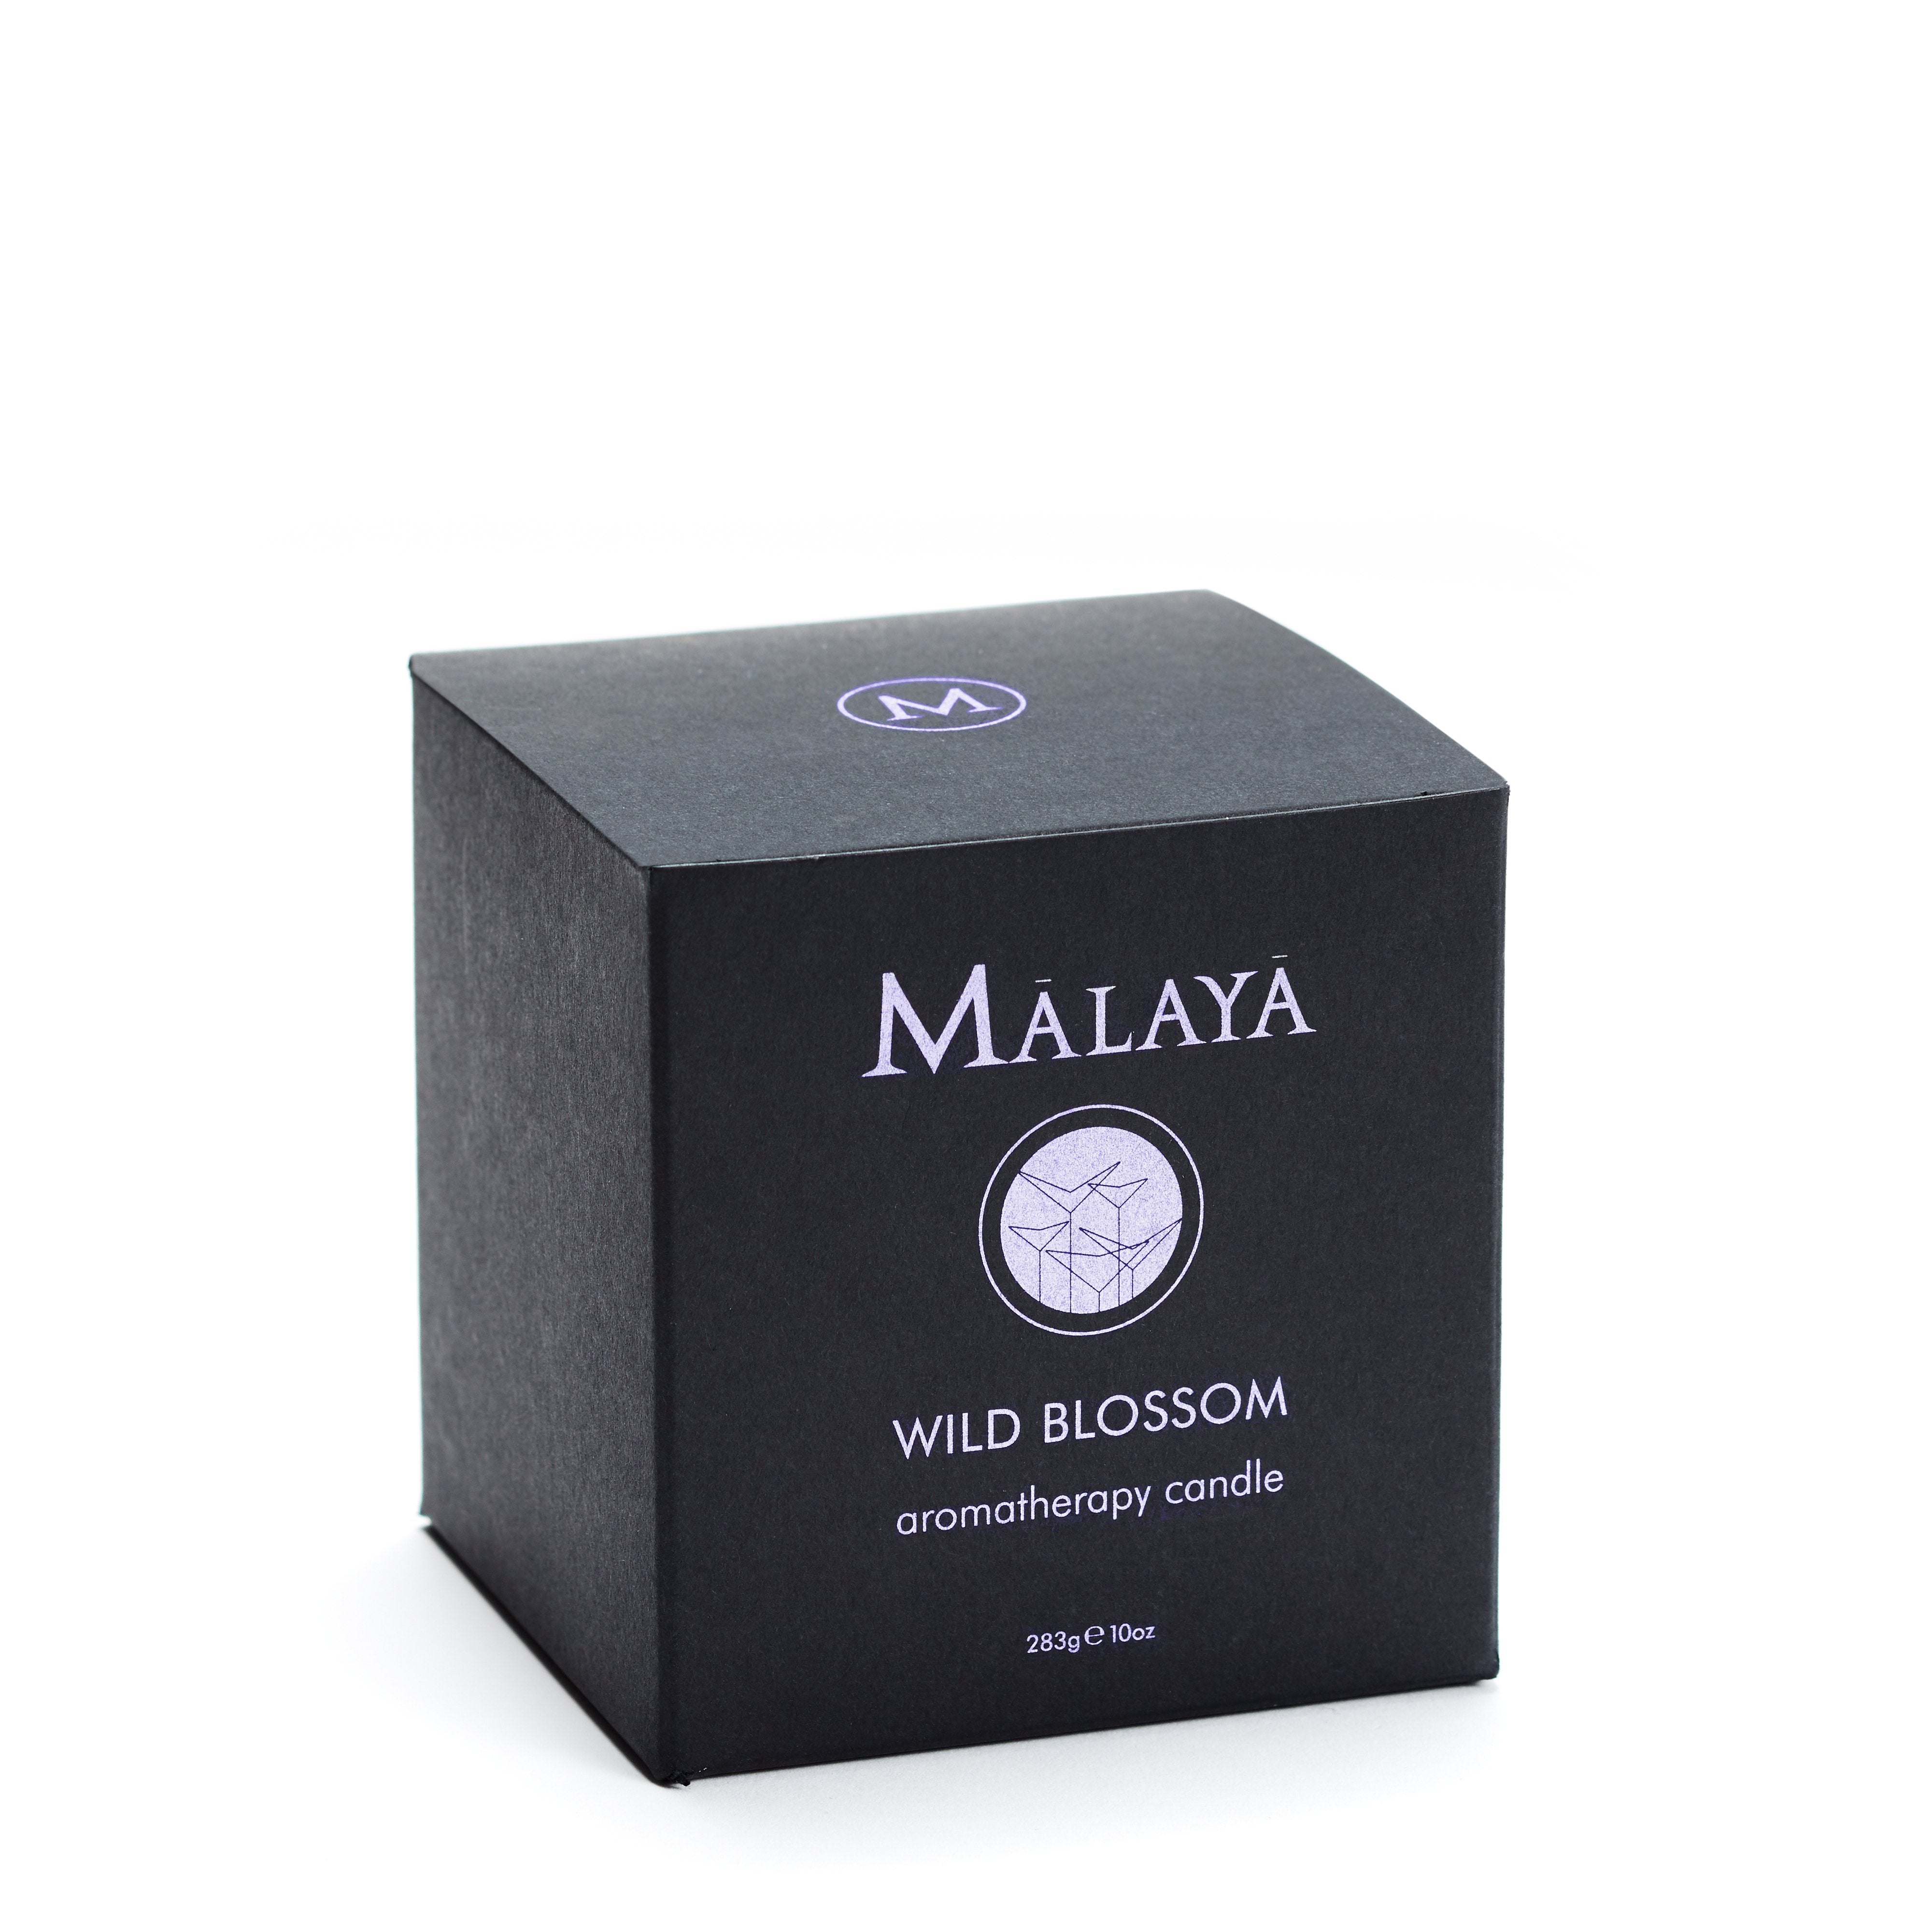 Aromatherapy Candle - Wild Blossom